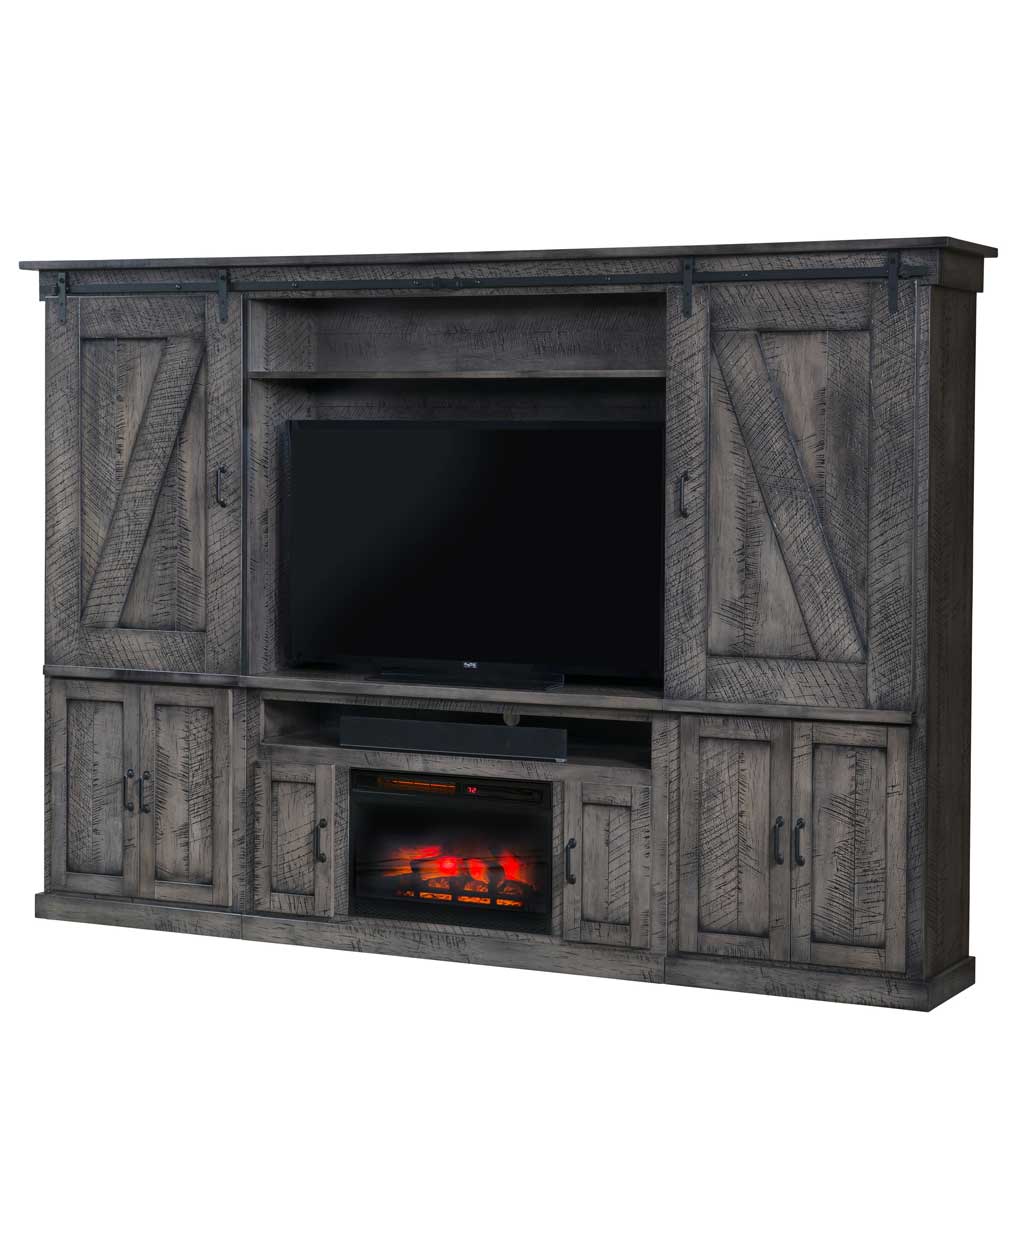 Durango Wall Unit With Fireplace, Wall To Entertainment Center Bookcase And Fireplace